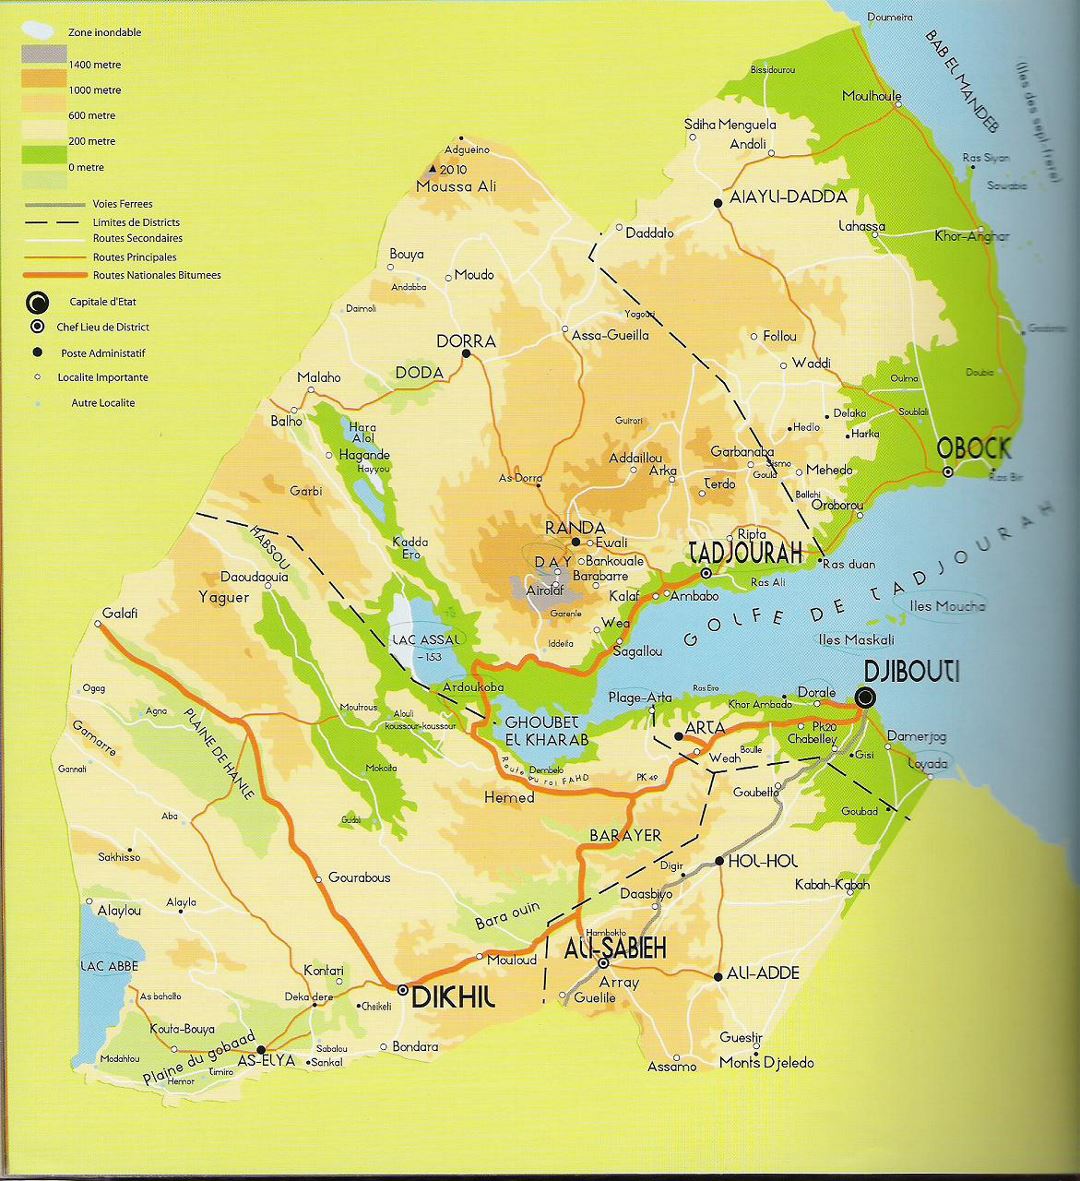 Detailed elevation map of Djibouti with roads and cities